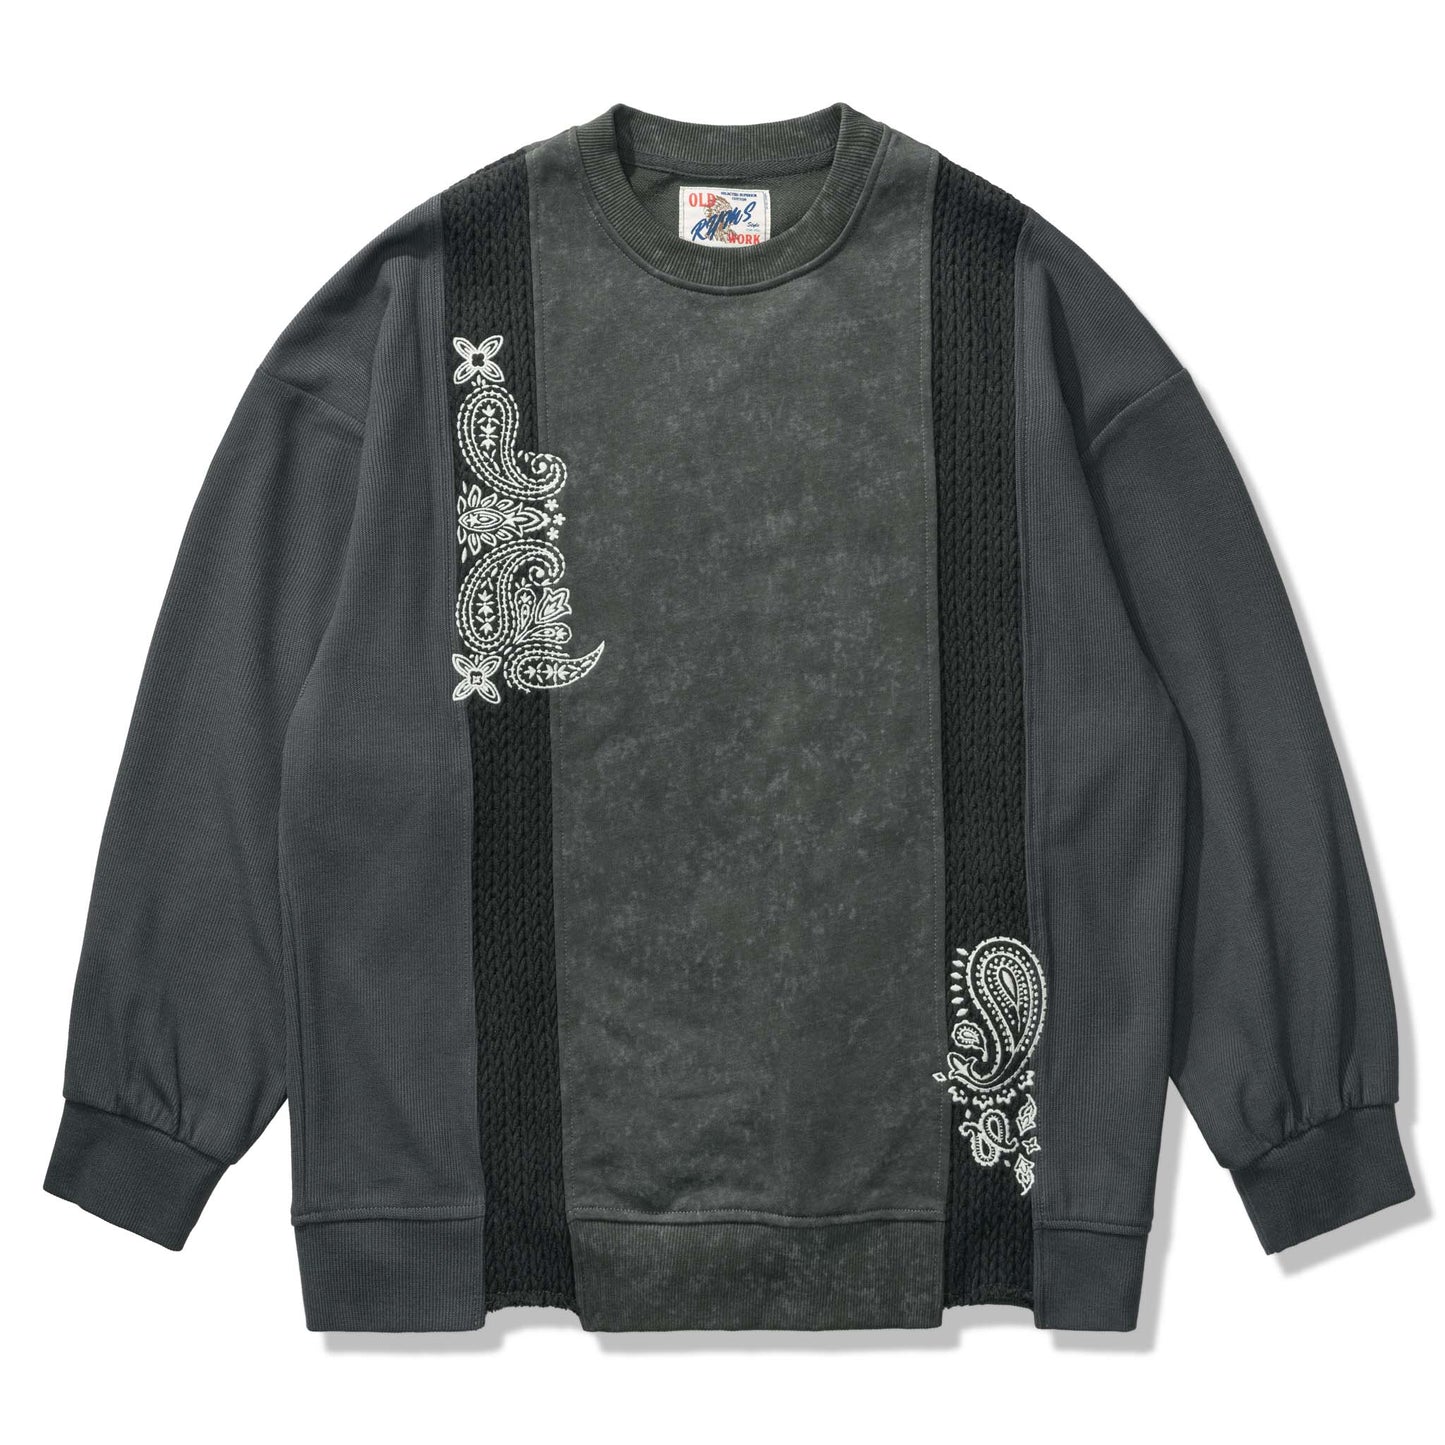 Reconstruction paisley embroidery cable knit combination sweatshirt